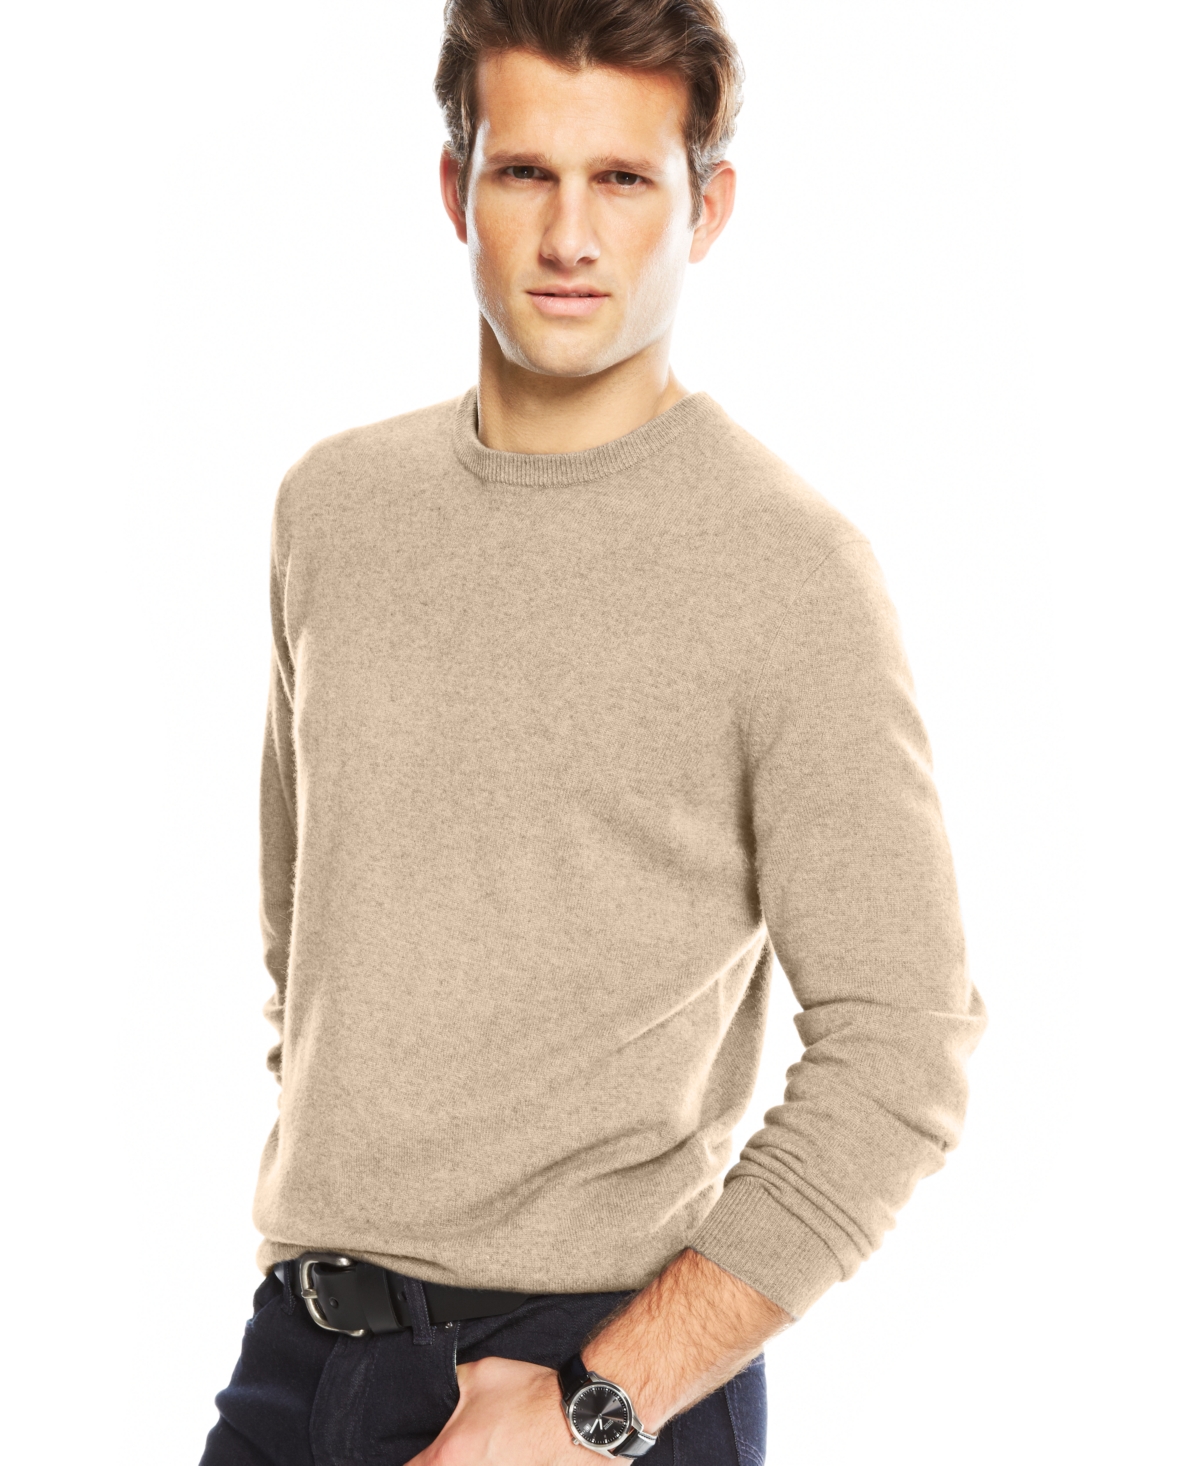 Cashmere Crew-Neck Sweater, Created for Macy's - Heirloom Rose Heather